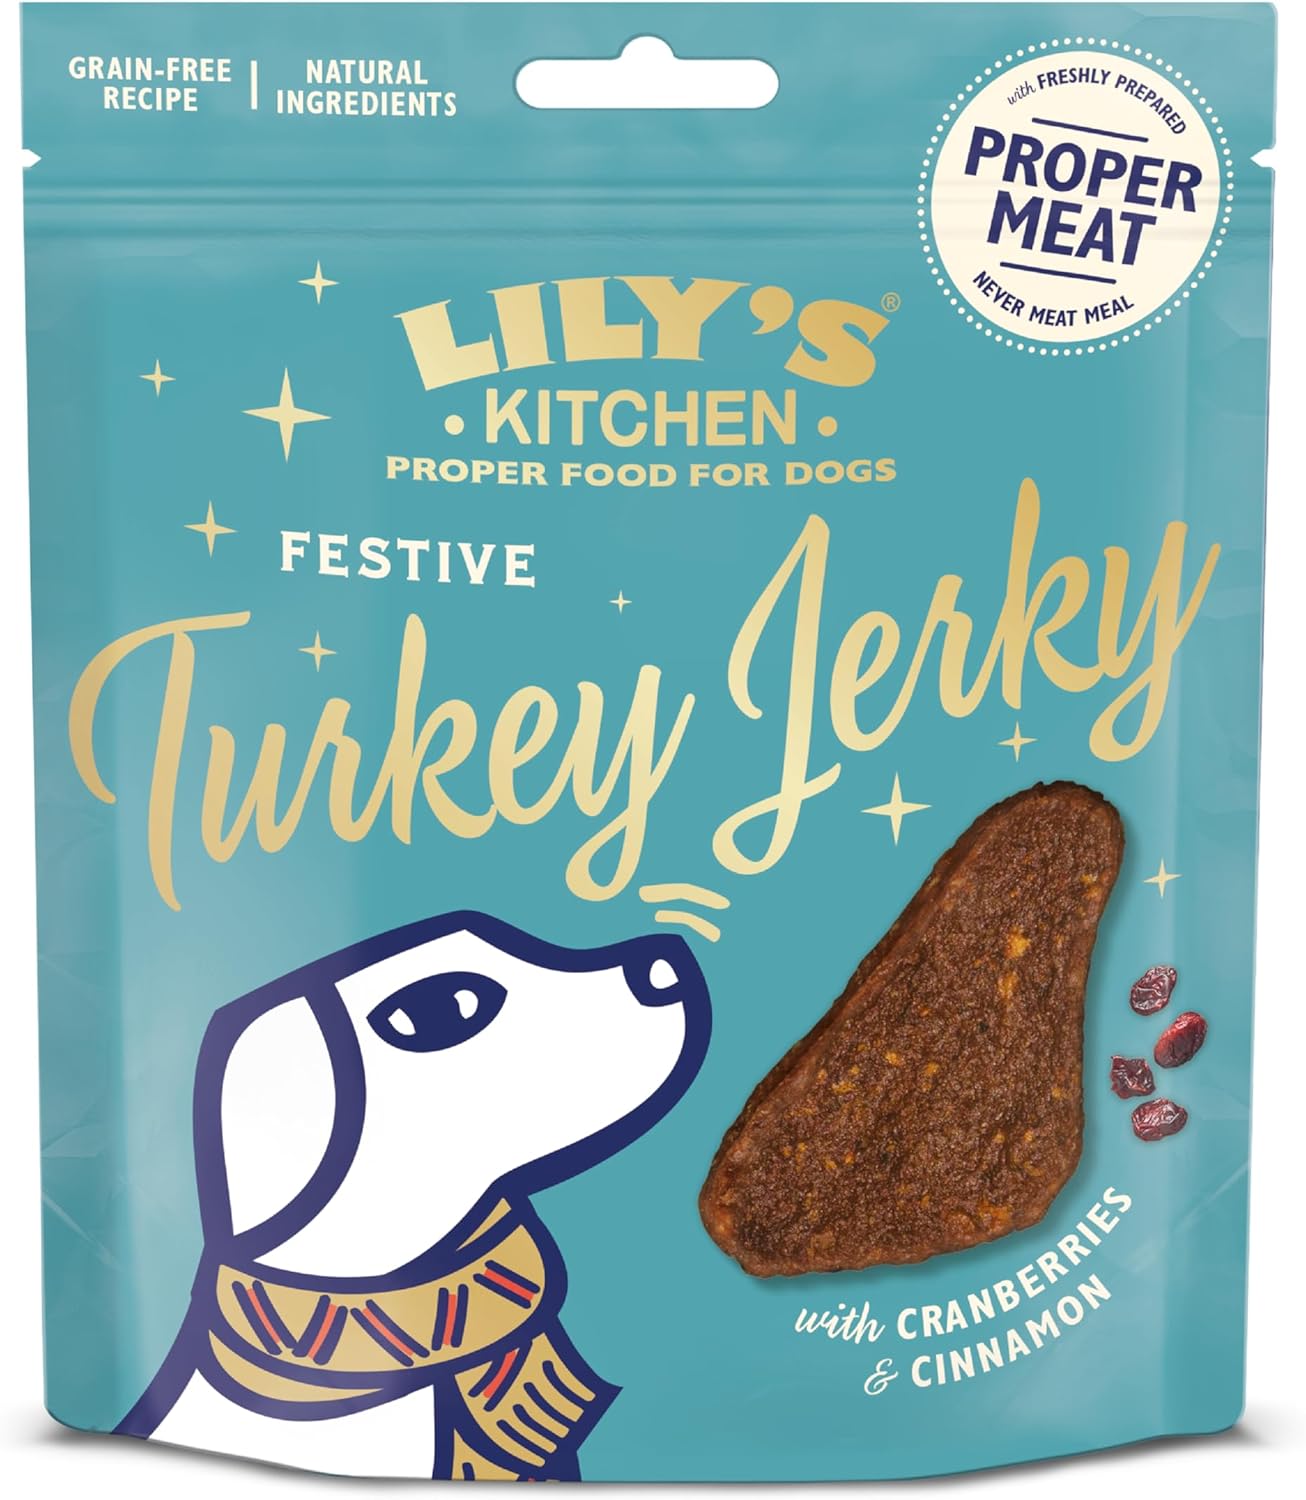 Lily’s Kitchen with Natural Ingredients Adult Dog Treats Packet Festive Turkey Jerky Grain-Free Recipe 8x70g?DCMT21